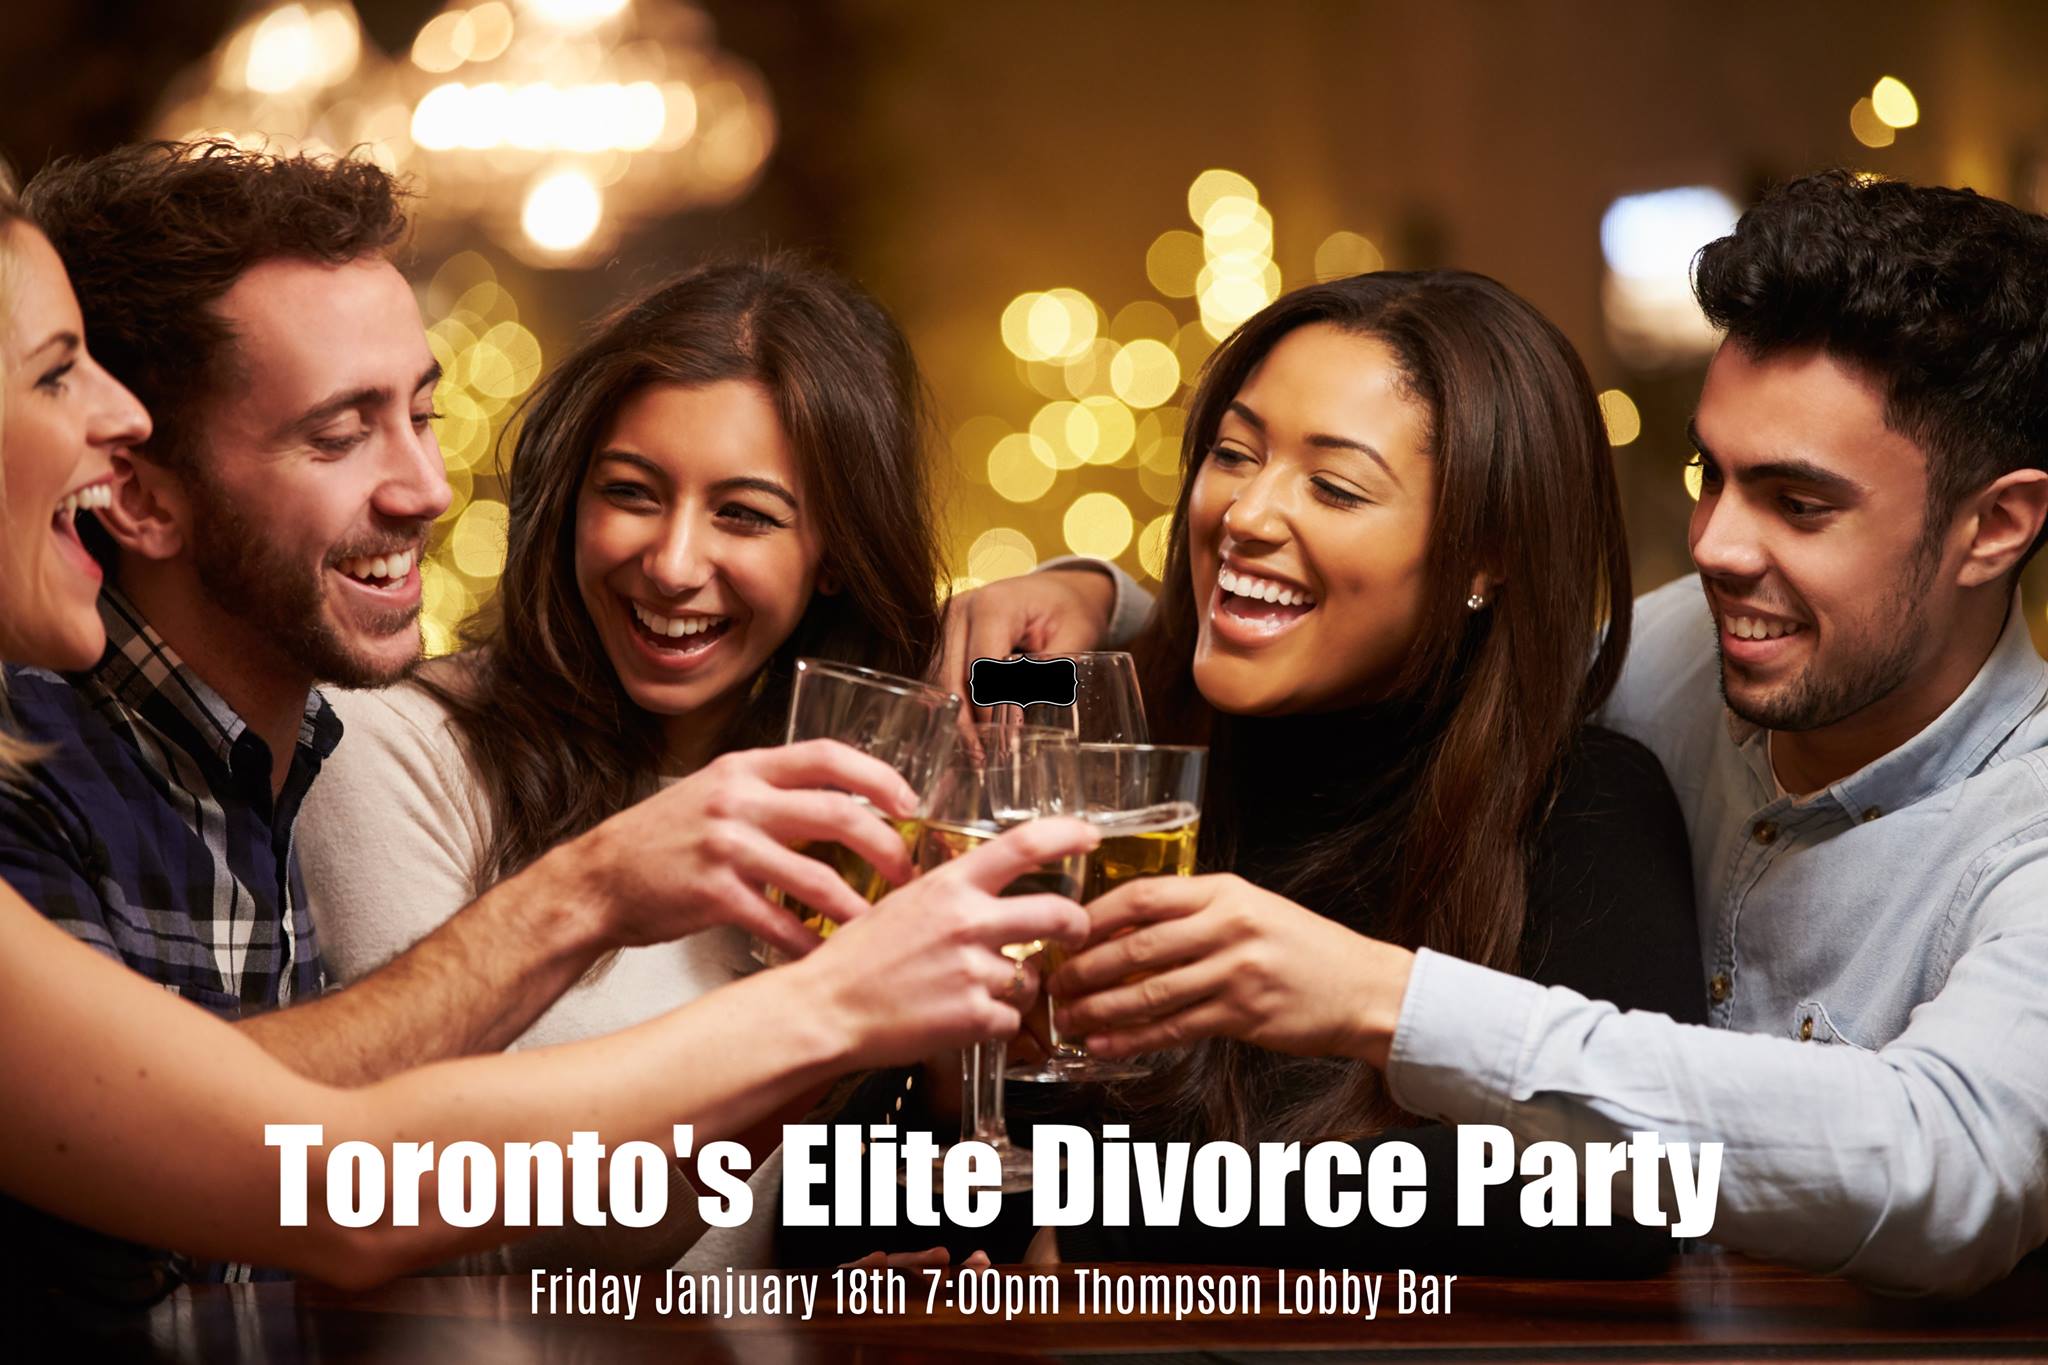 Don T Miss Toronto S Elite Divorce Party On Friday January